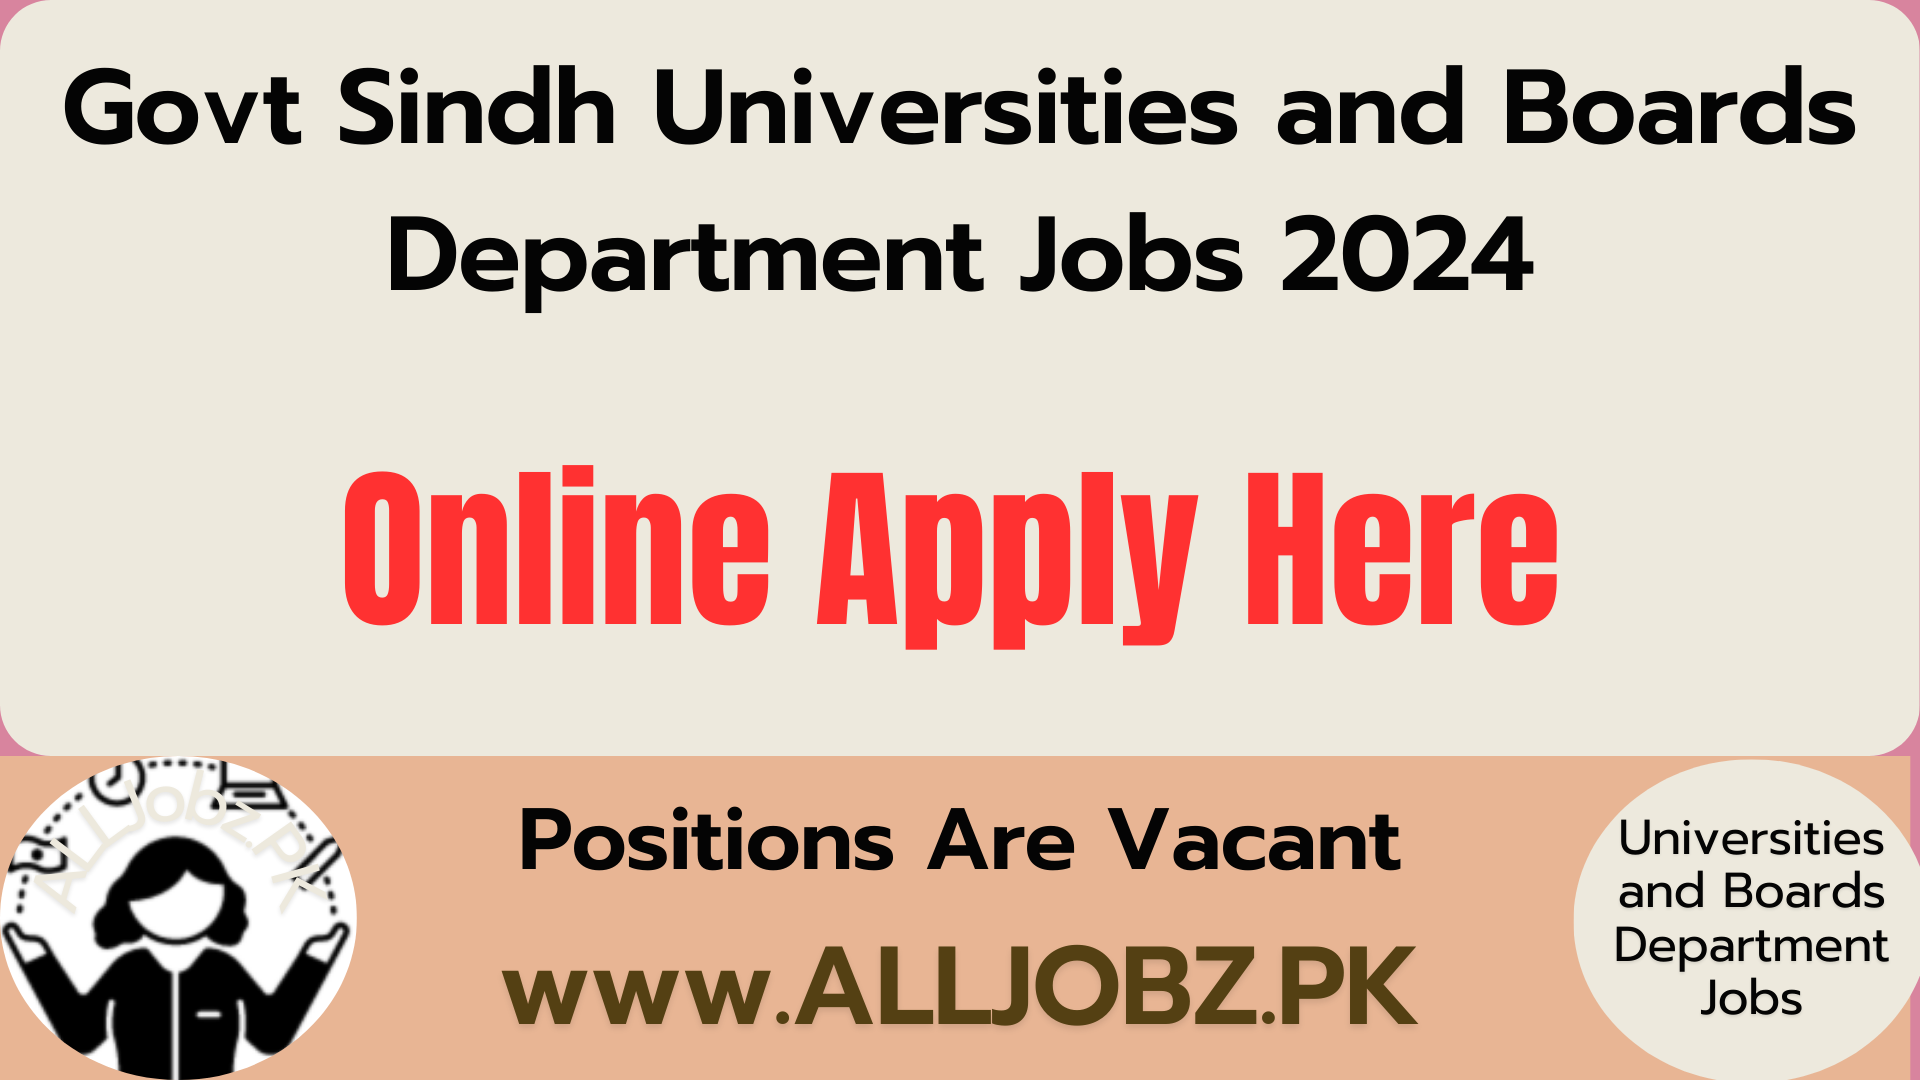 Govt Sindh Universities And Boards Department Jobs 2024 Online Apply, Sindh Government Jobs All Department 2024, Secretary Universities And Boards Department Sindh Address, Sindh Govt Universities And Boards Department Jobs 2021, List Of Government Universities In Sindh, Www.sindh.gov.pk Jobs 2024, Sindh Government Jobs For Intermediate, Secretary Universities And Boards Sindh, Sindh Universities And Boards Department Jobs